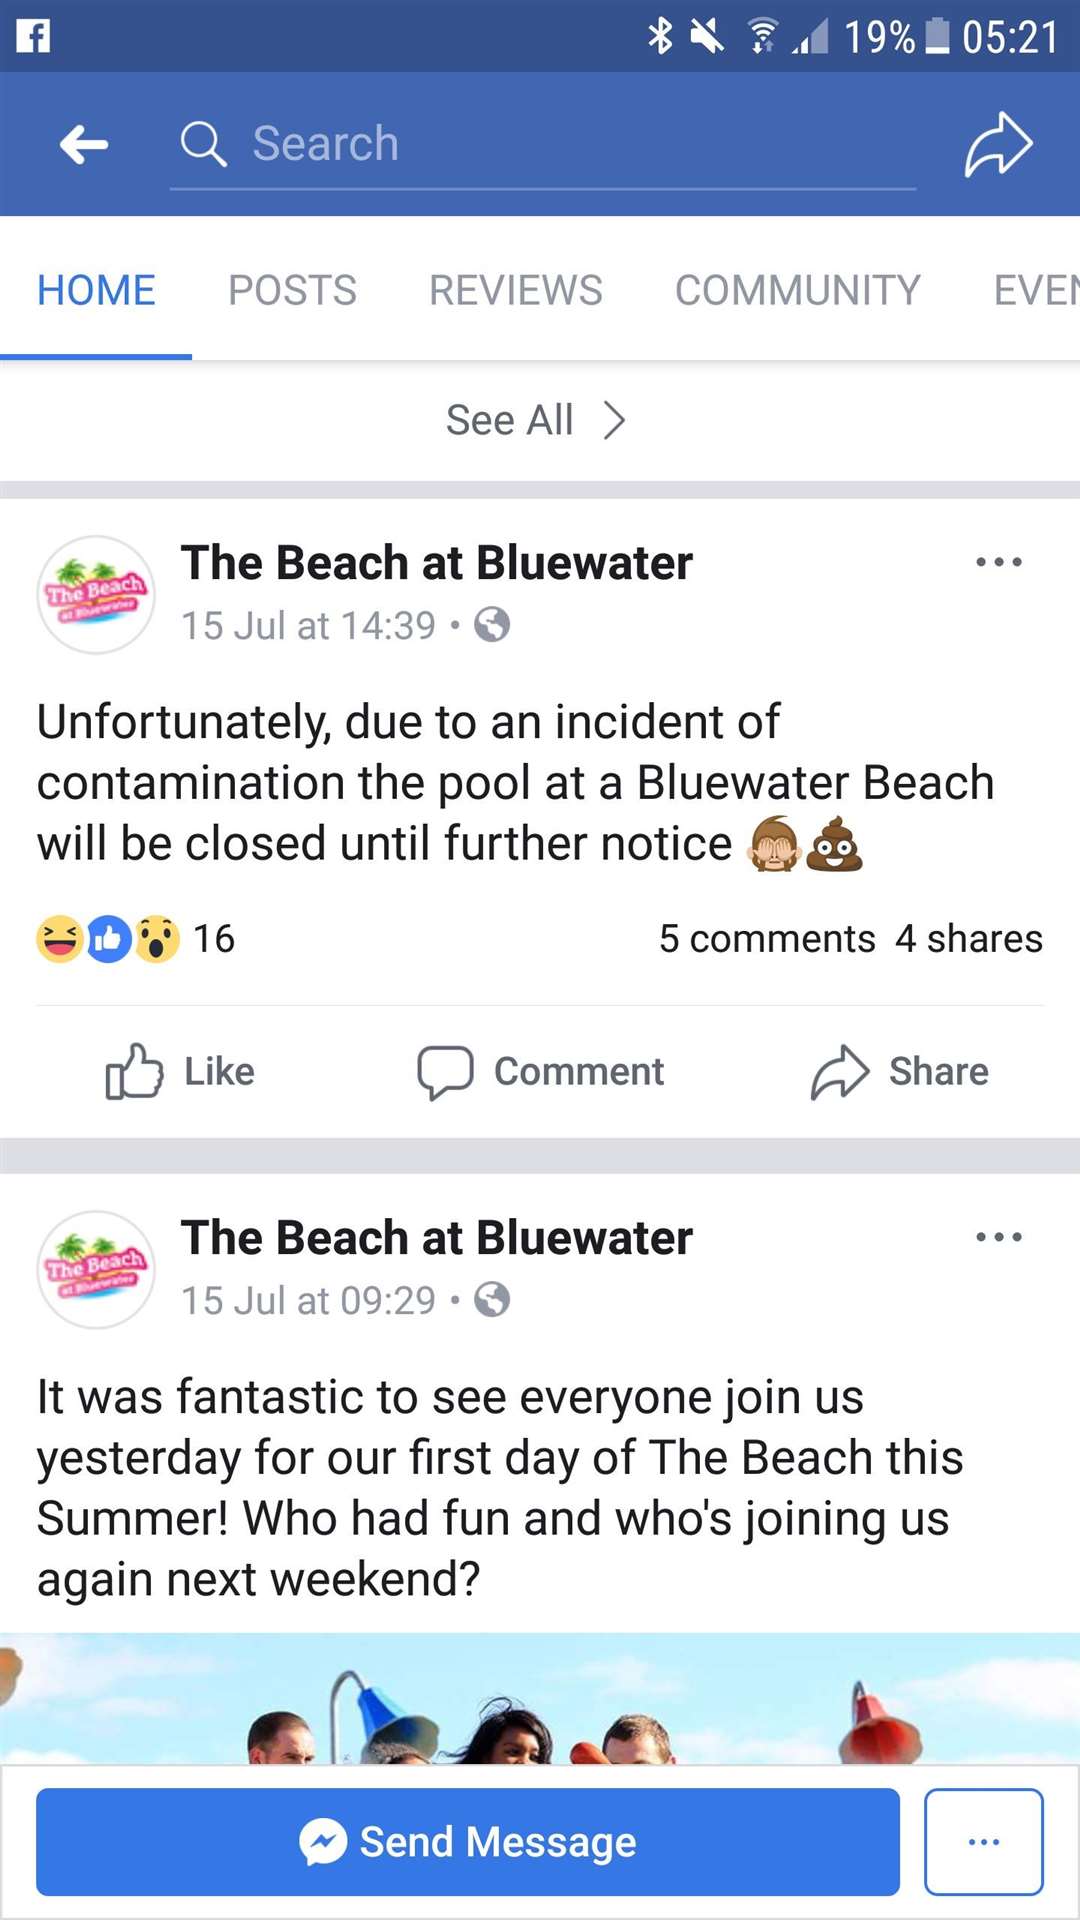 The post by The Beach at Bluewater which has since been deleted